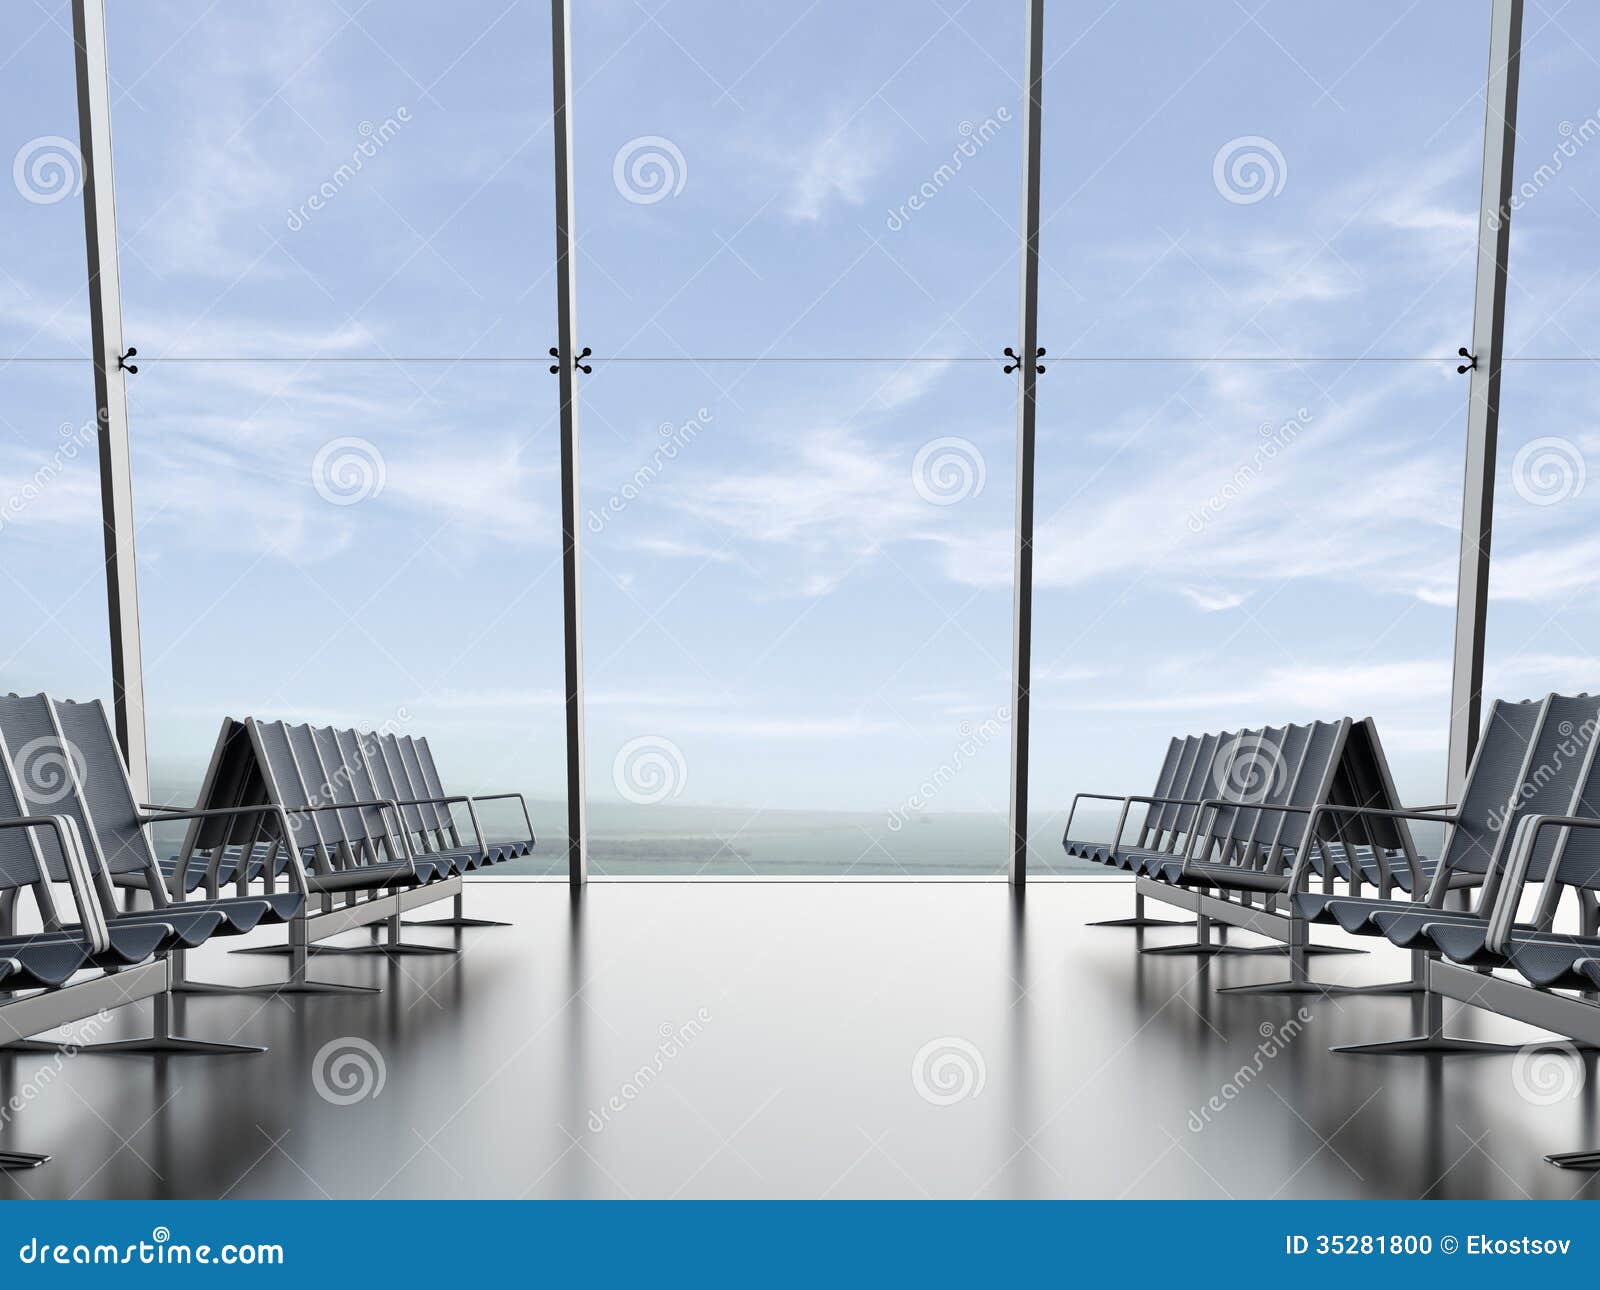 airport lounge clipart - photo #42